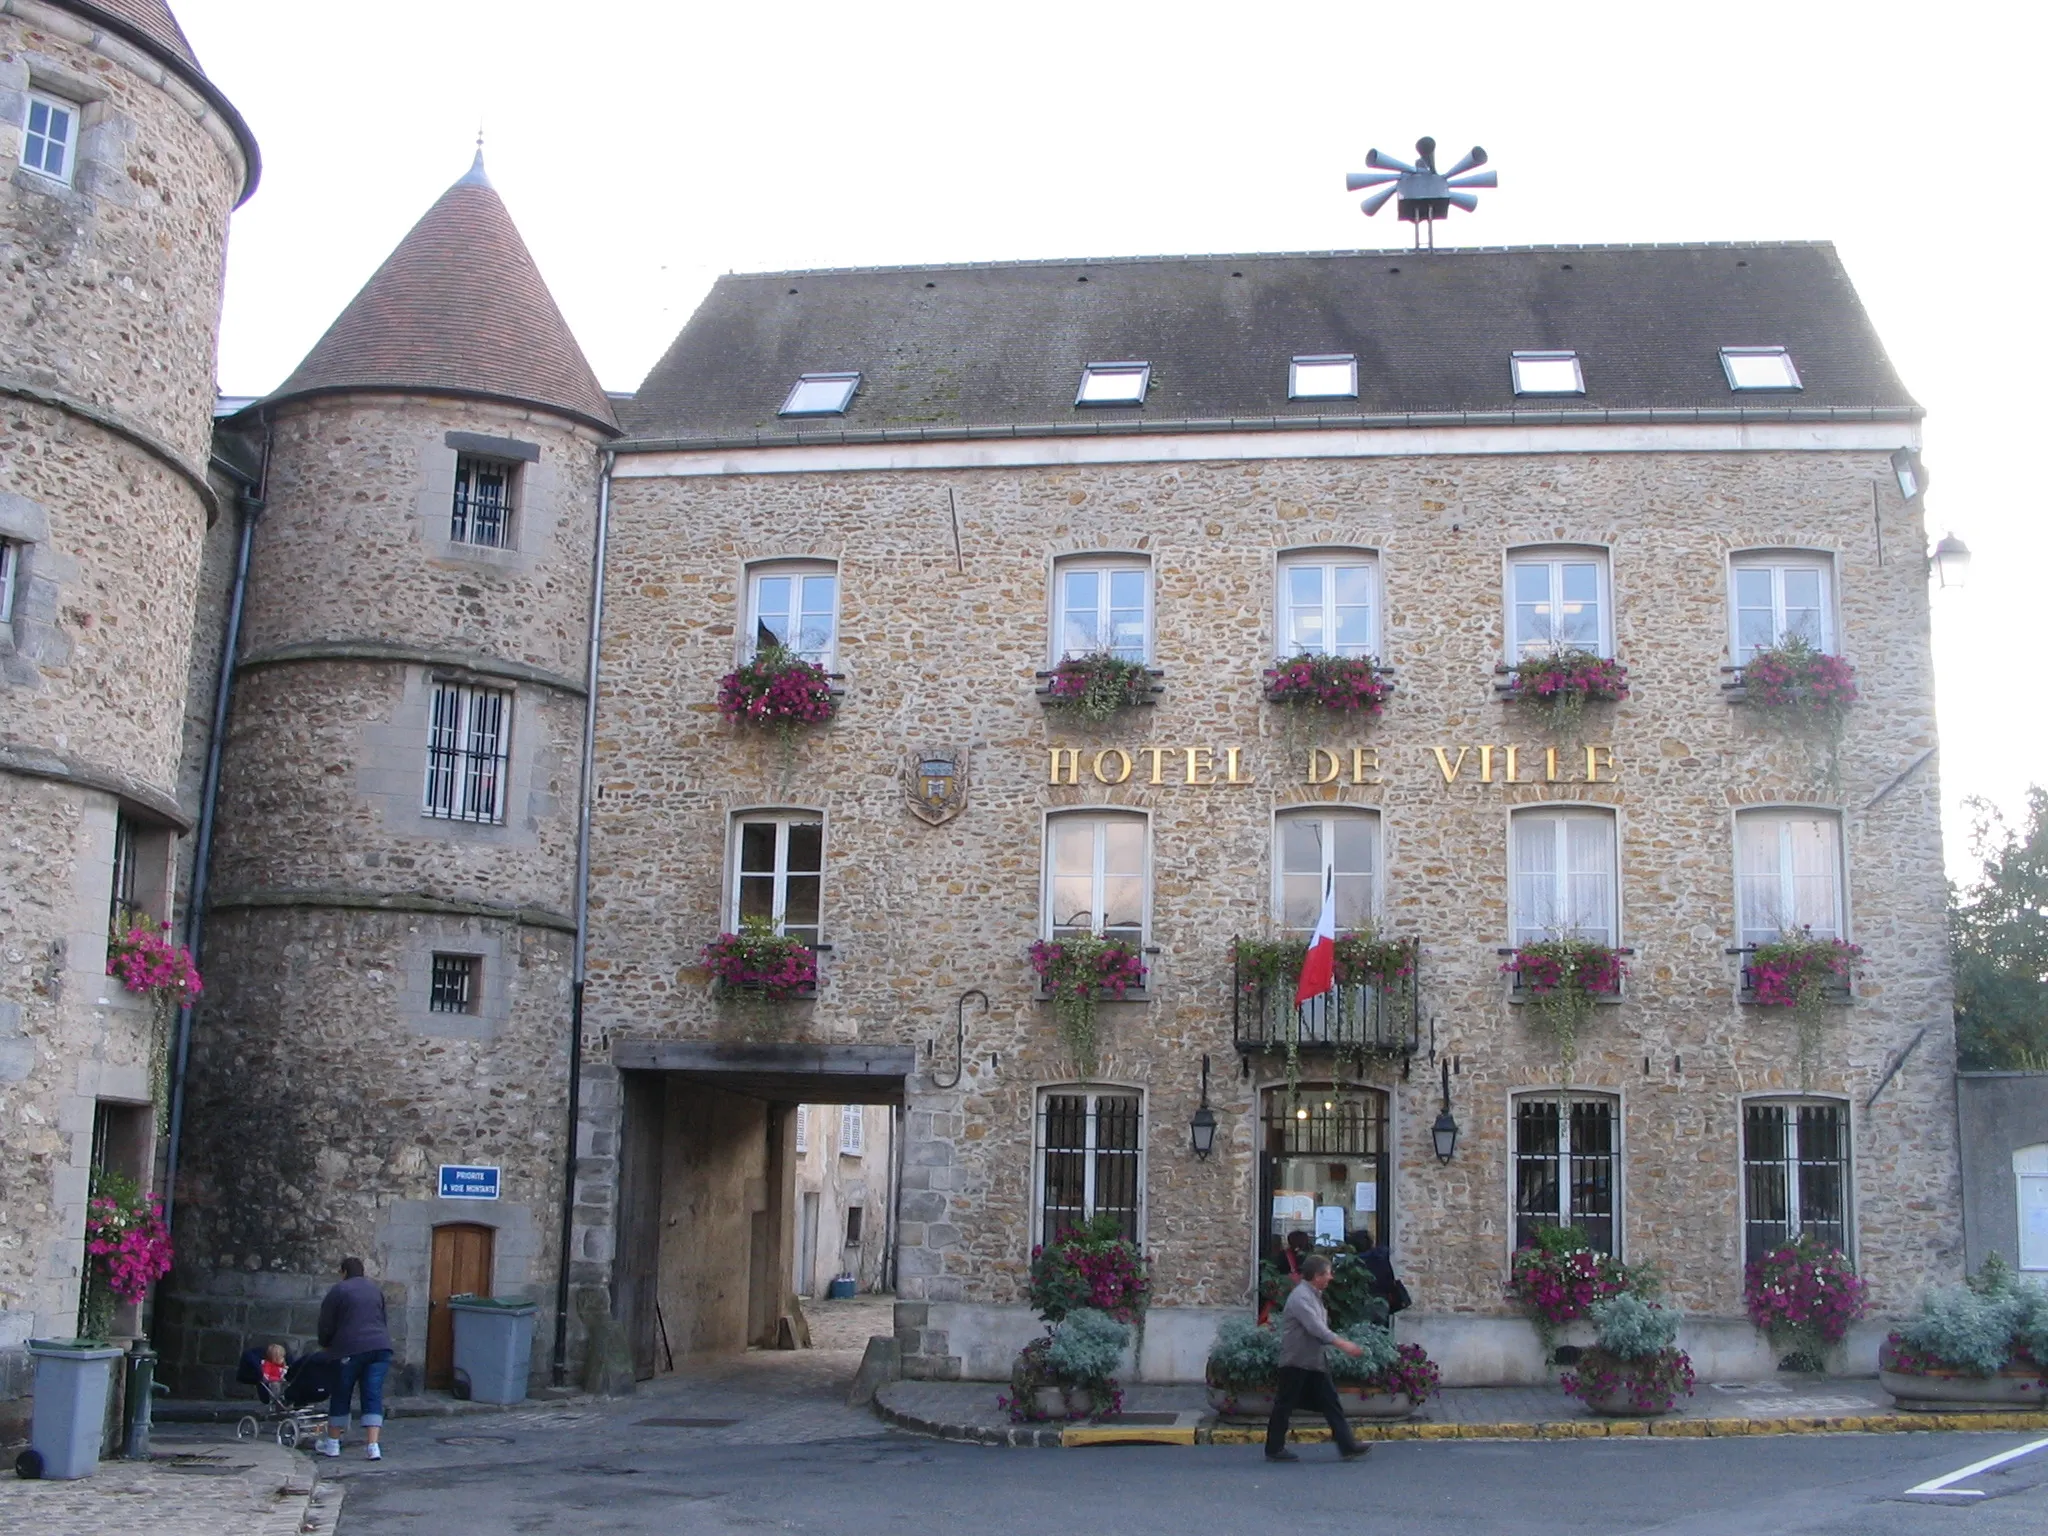 Photo showing: The town hall of Tournan-en-Brie, Seine-et-Marne, France.